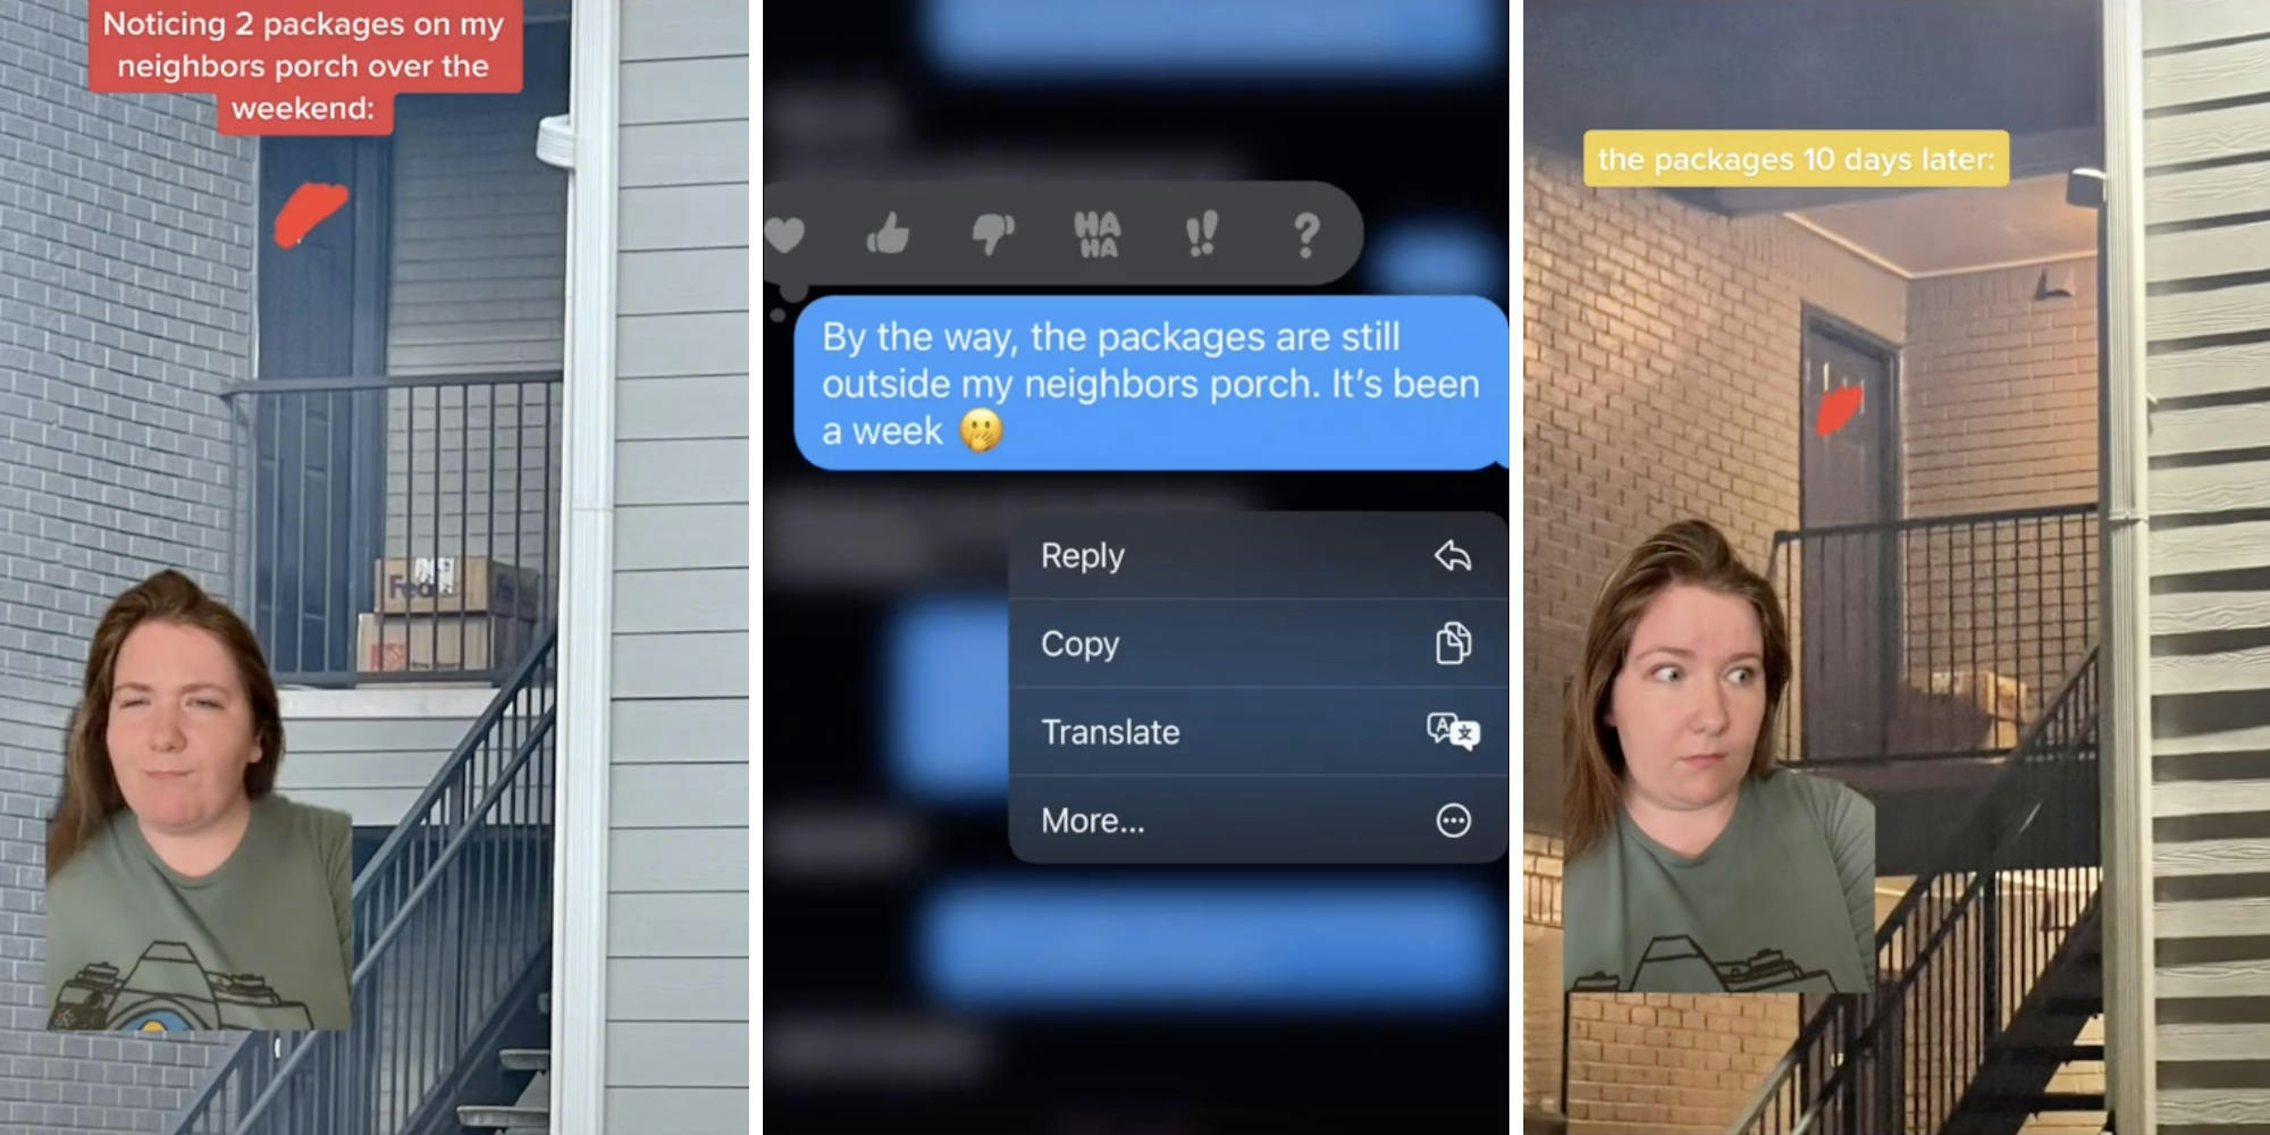 woman questioning packages outside neighbors porch (l) phone text (m) woman looking surprised at packages still there ®)